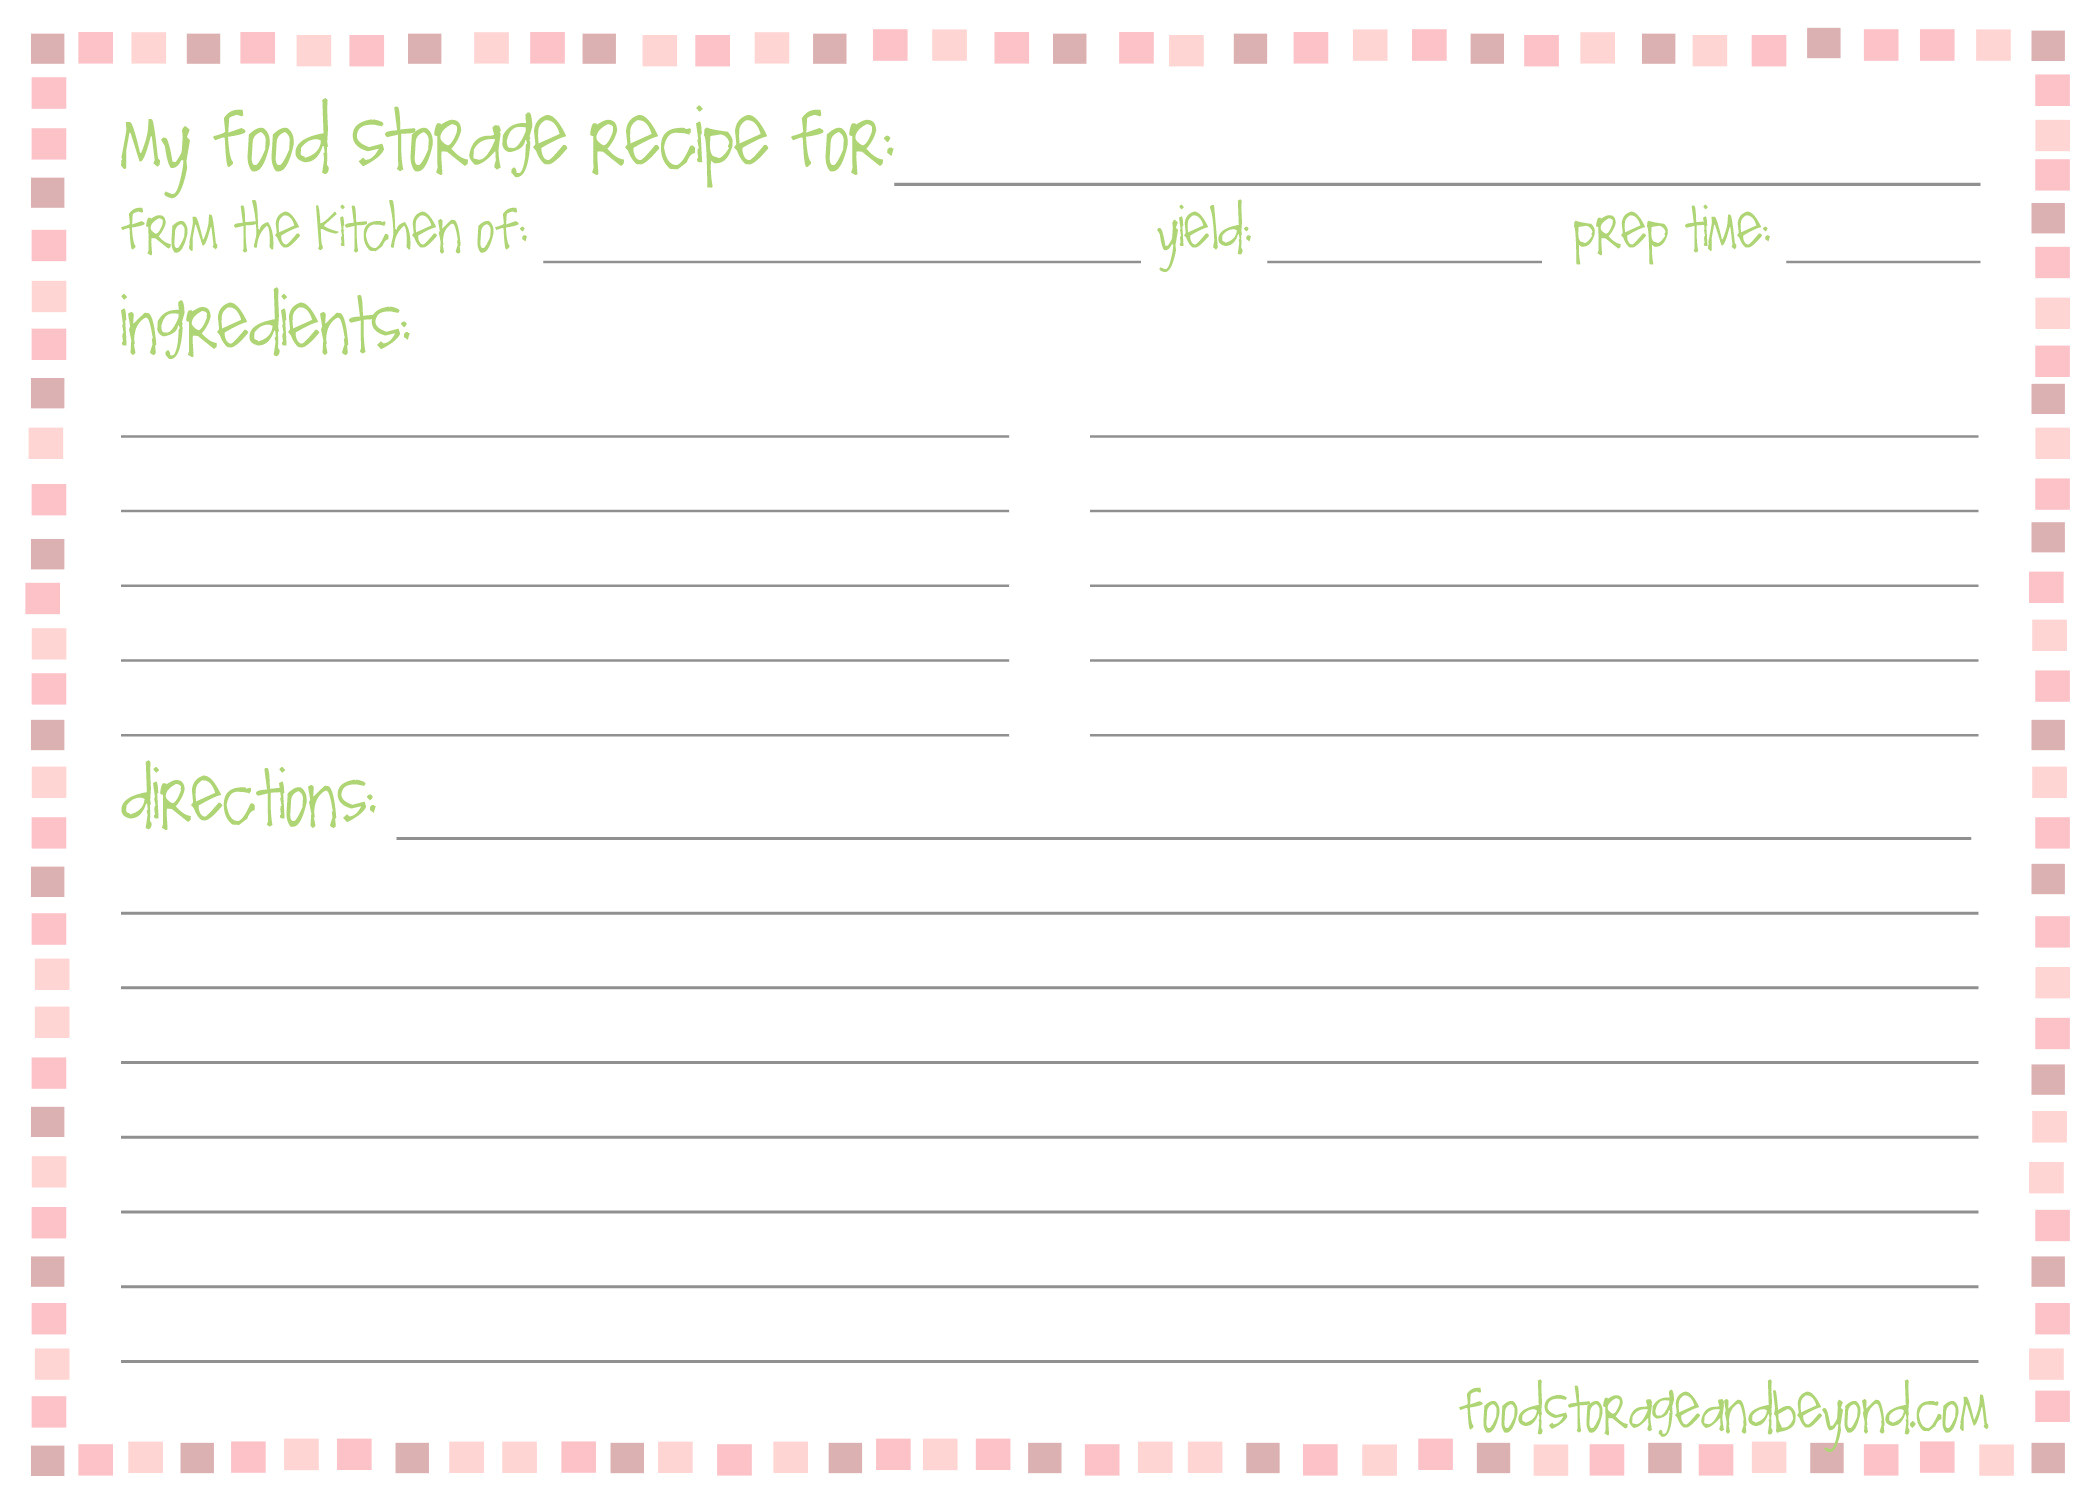 5×7 Recipe Card Template for Word Recipe Cards Food Storage and Beyond